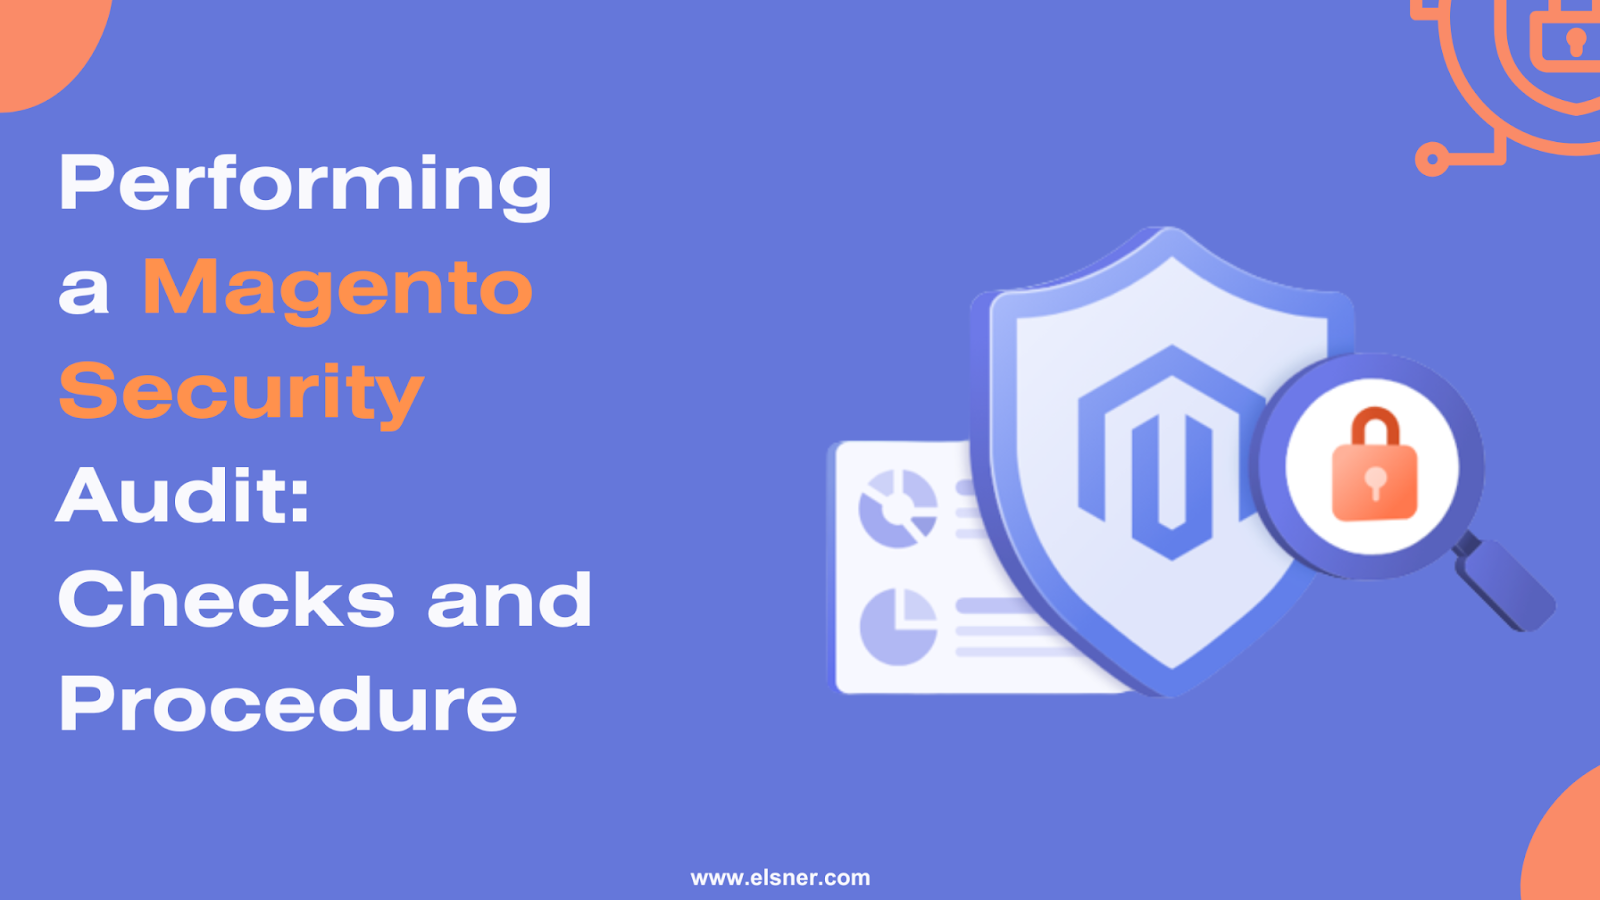 Performing a Magento Security Audit: Checks and Procedure